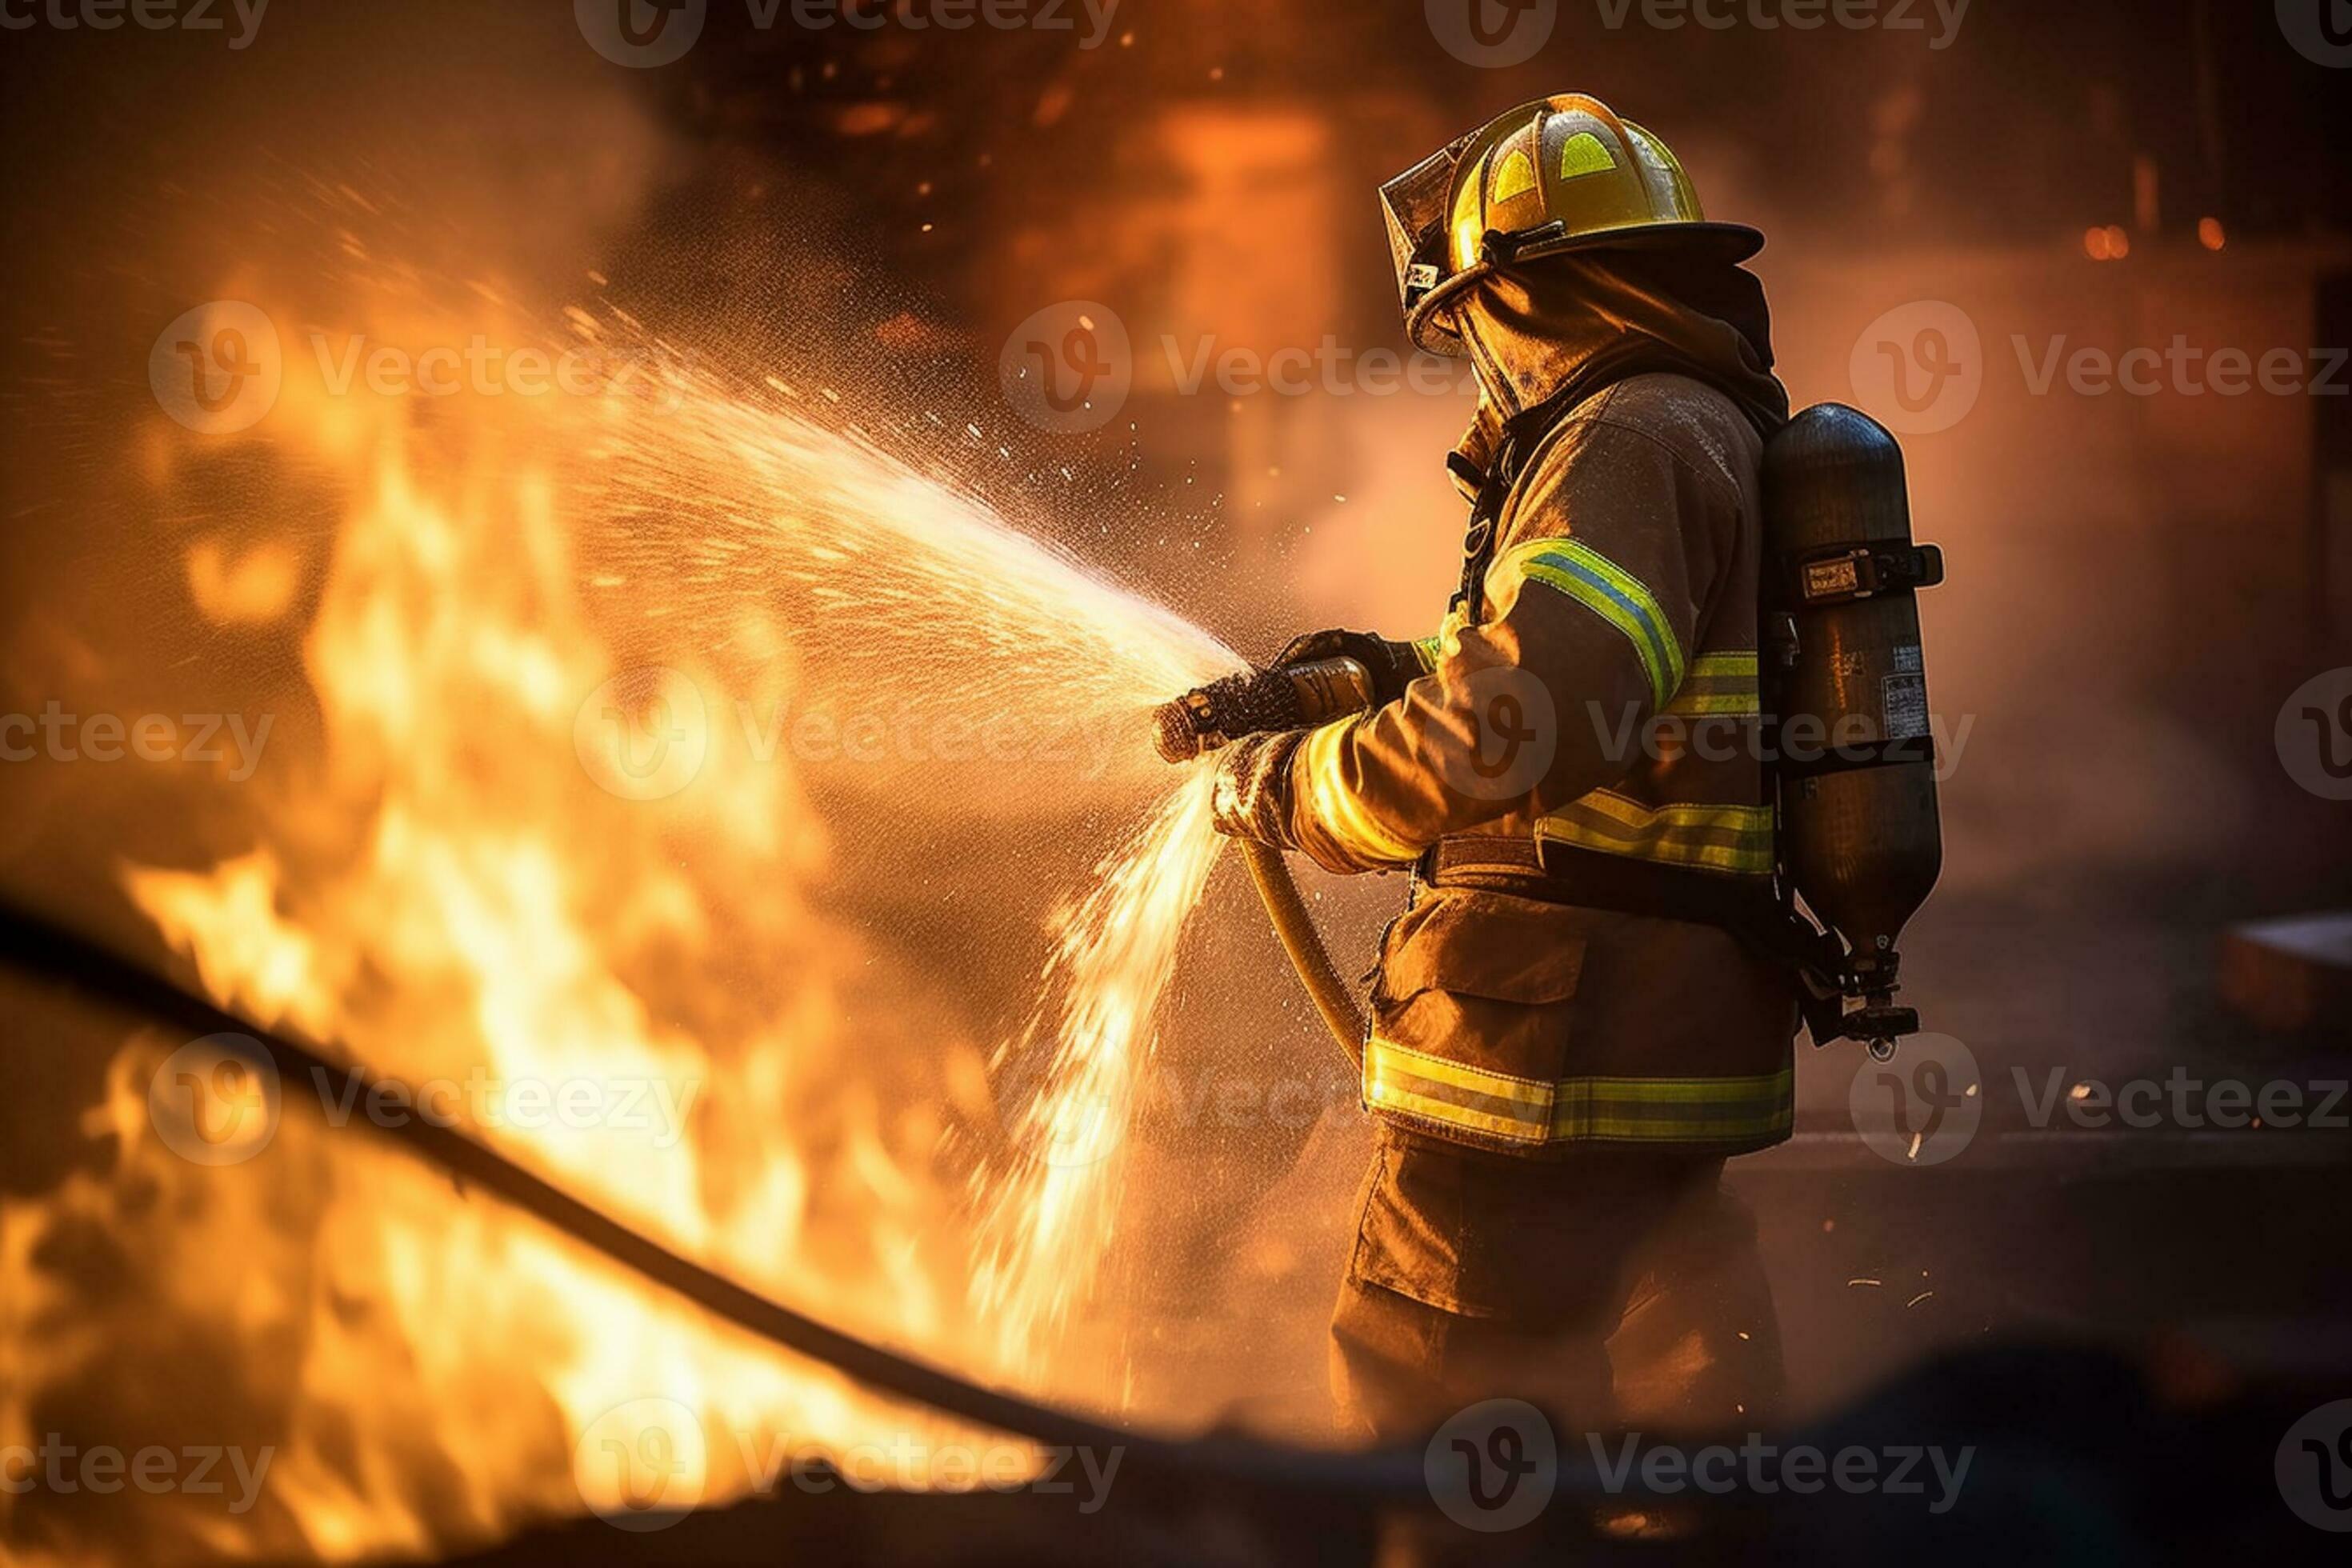 Free Firefighter Wallpaper for Phone 19201280 Firefighting Wallpapers 37  Wallpapers Adorable